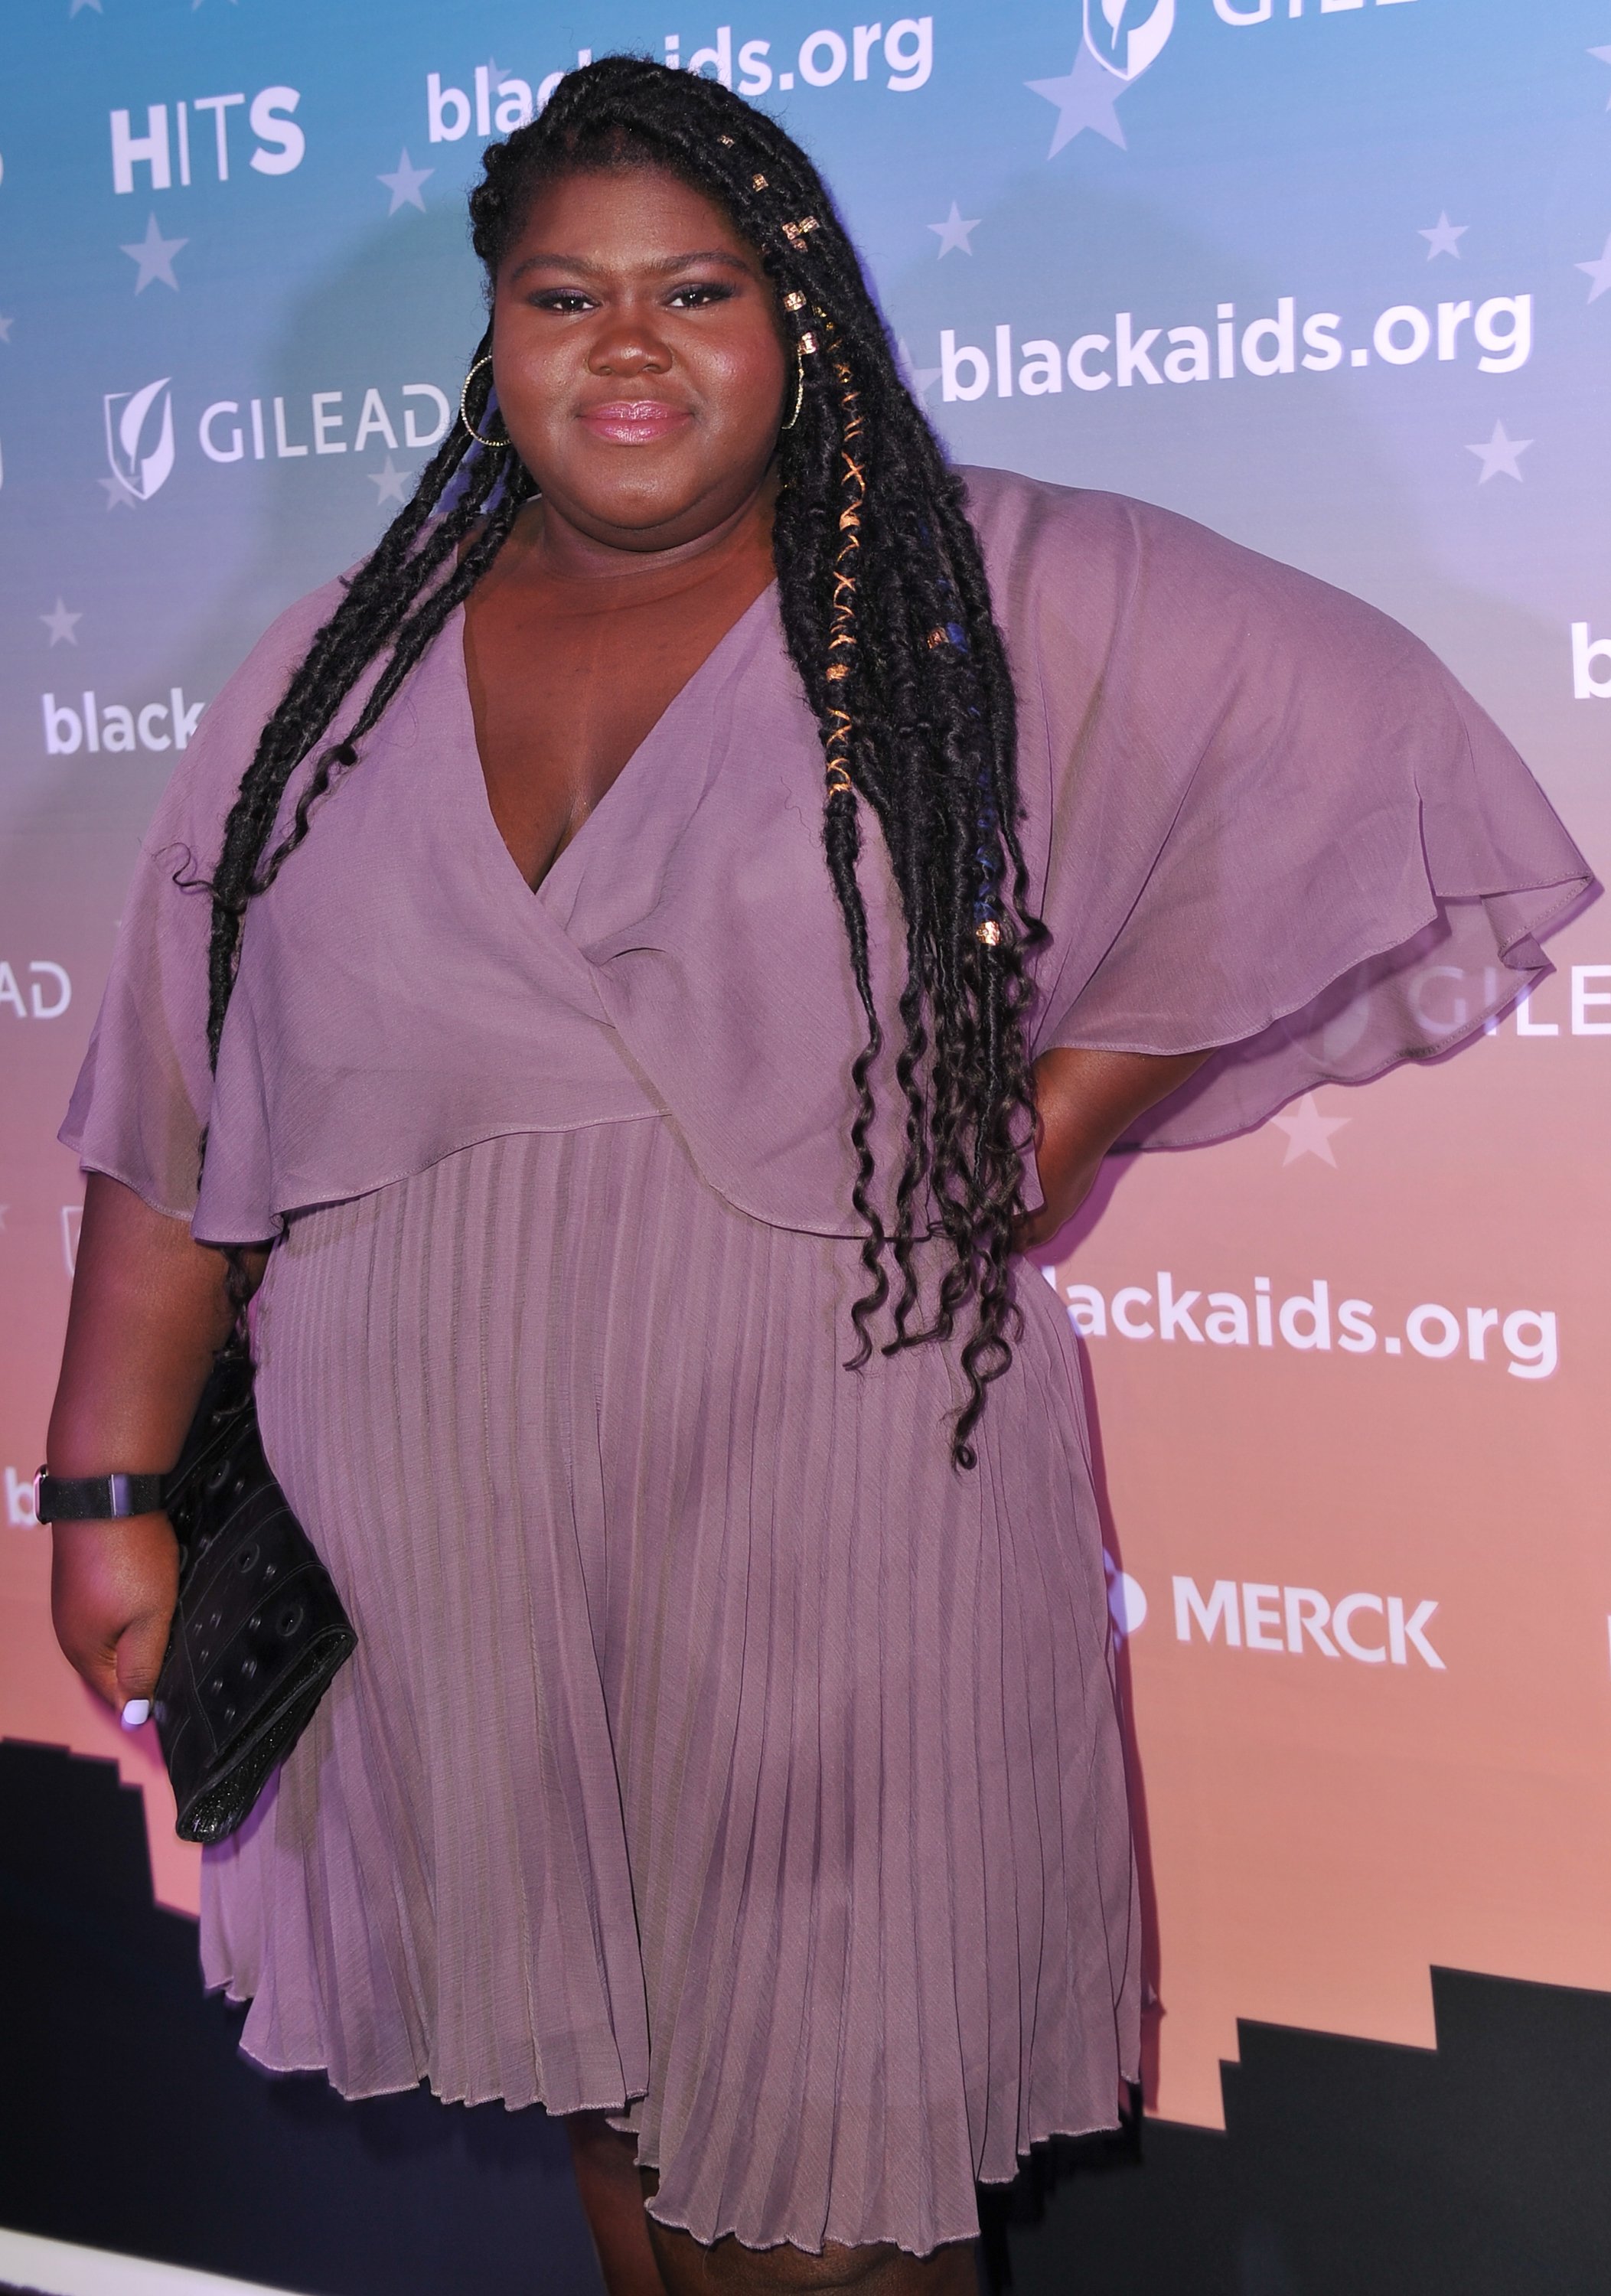 Gabourey Sidibe poses at the Black AIDS Institute's 2018 Heroes in the Struggle Gala on December 01, 2018 in Los Angeles, California. | Source: Getty Images